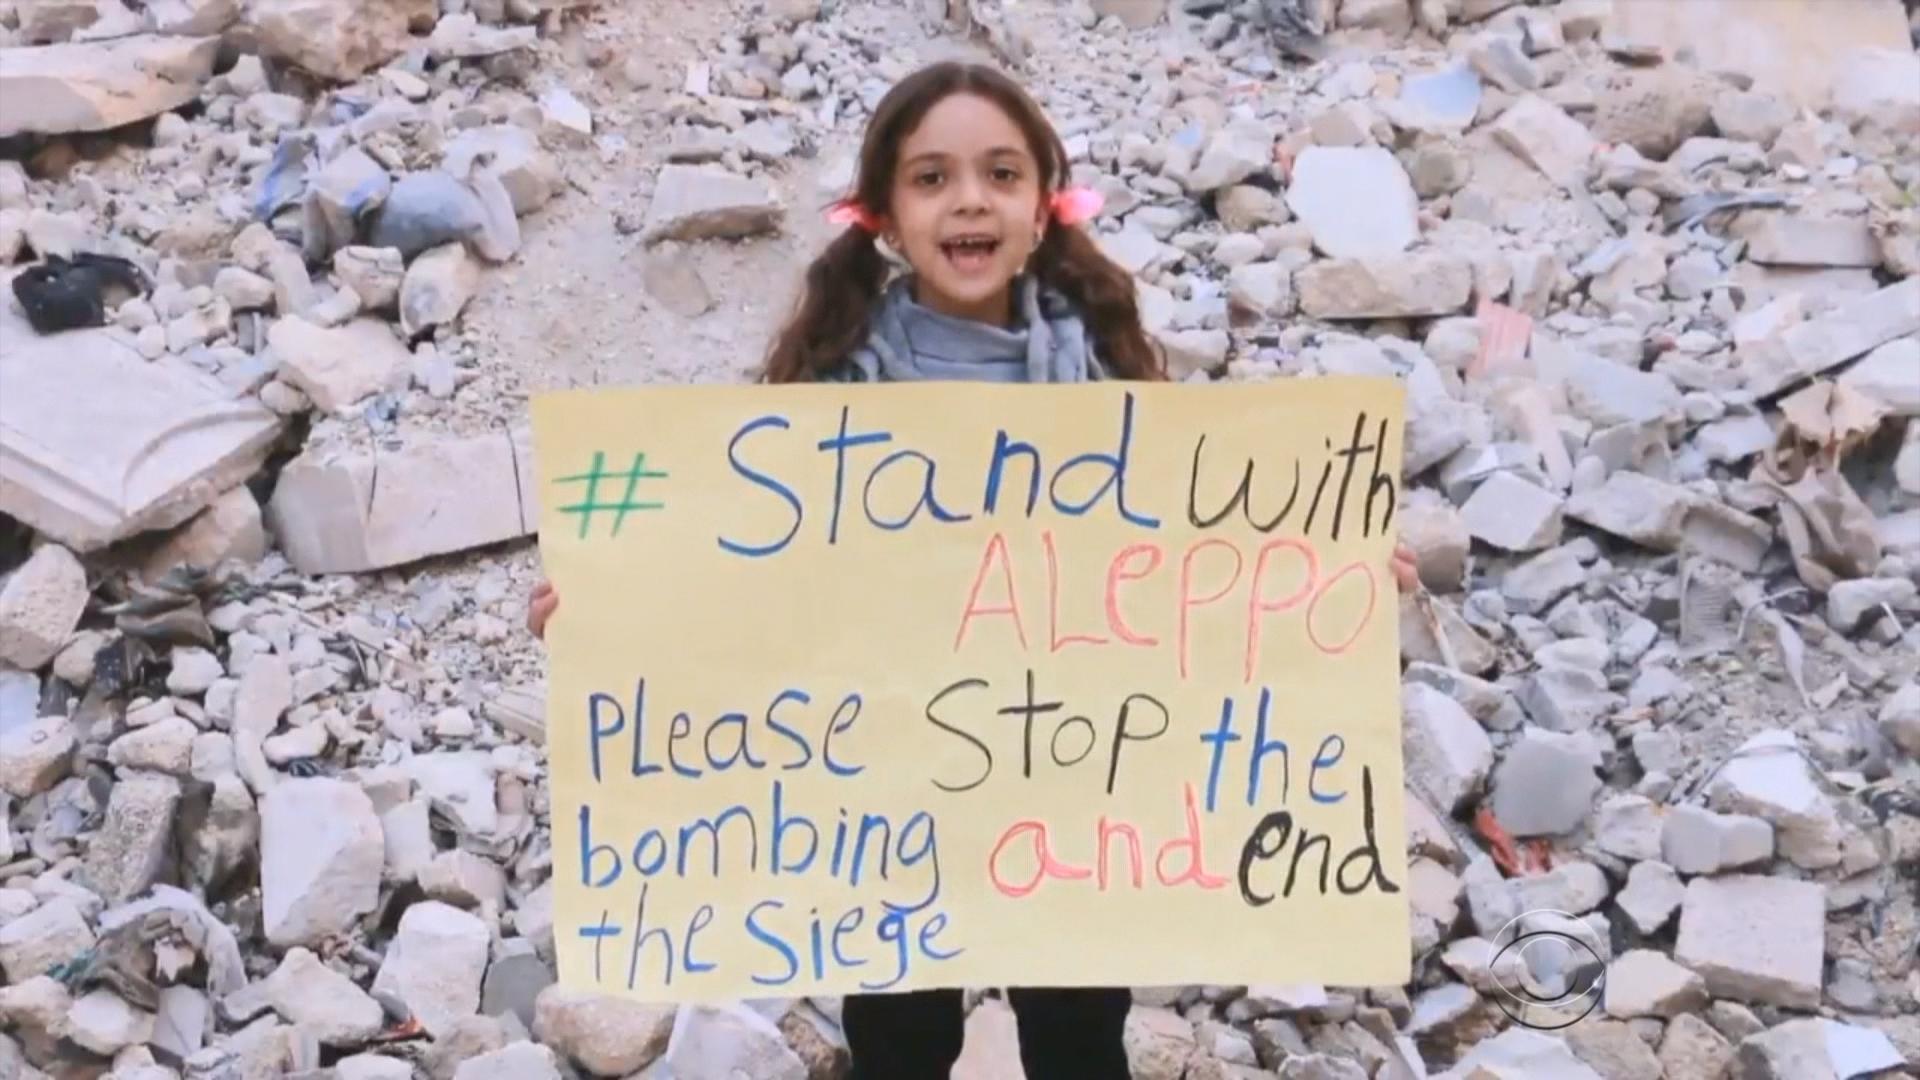 Bana Alabed Syrian Refugee Girl From Aleppo Begs Trump To Help 